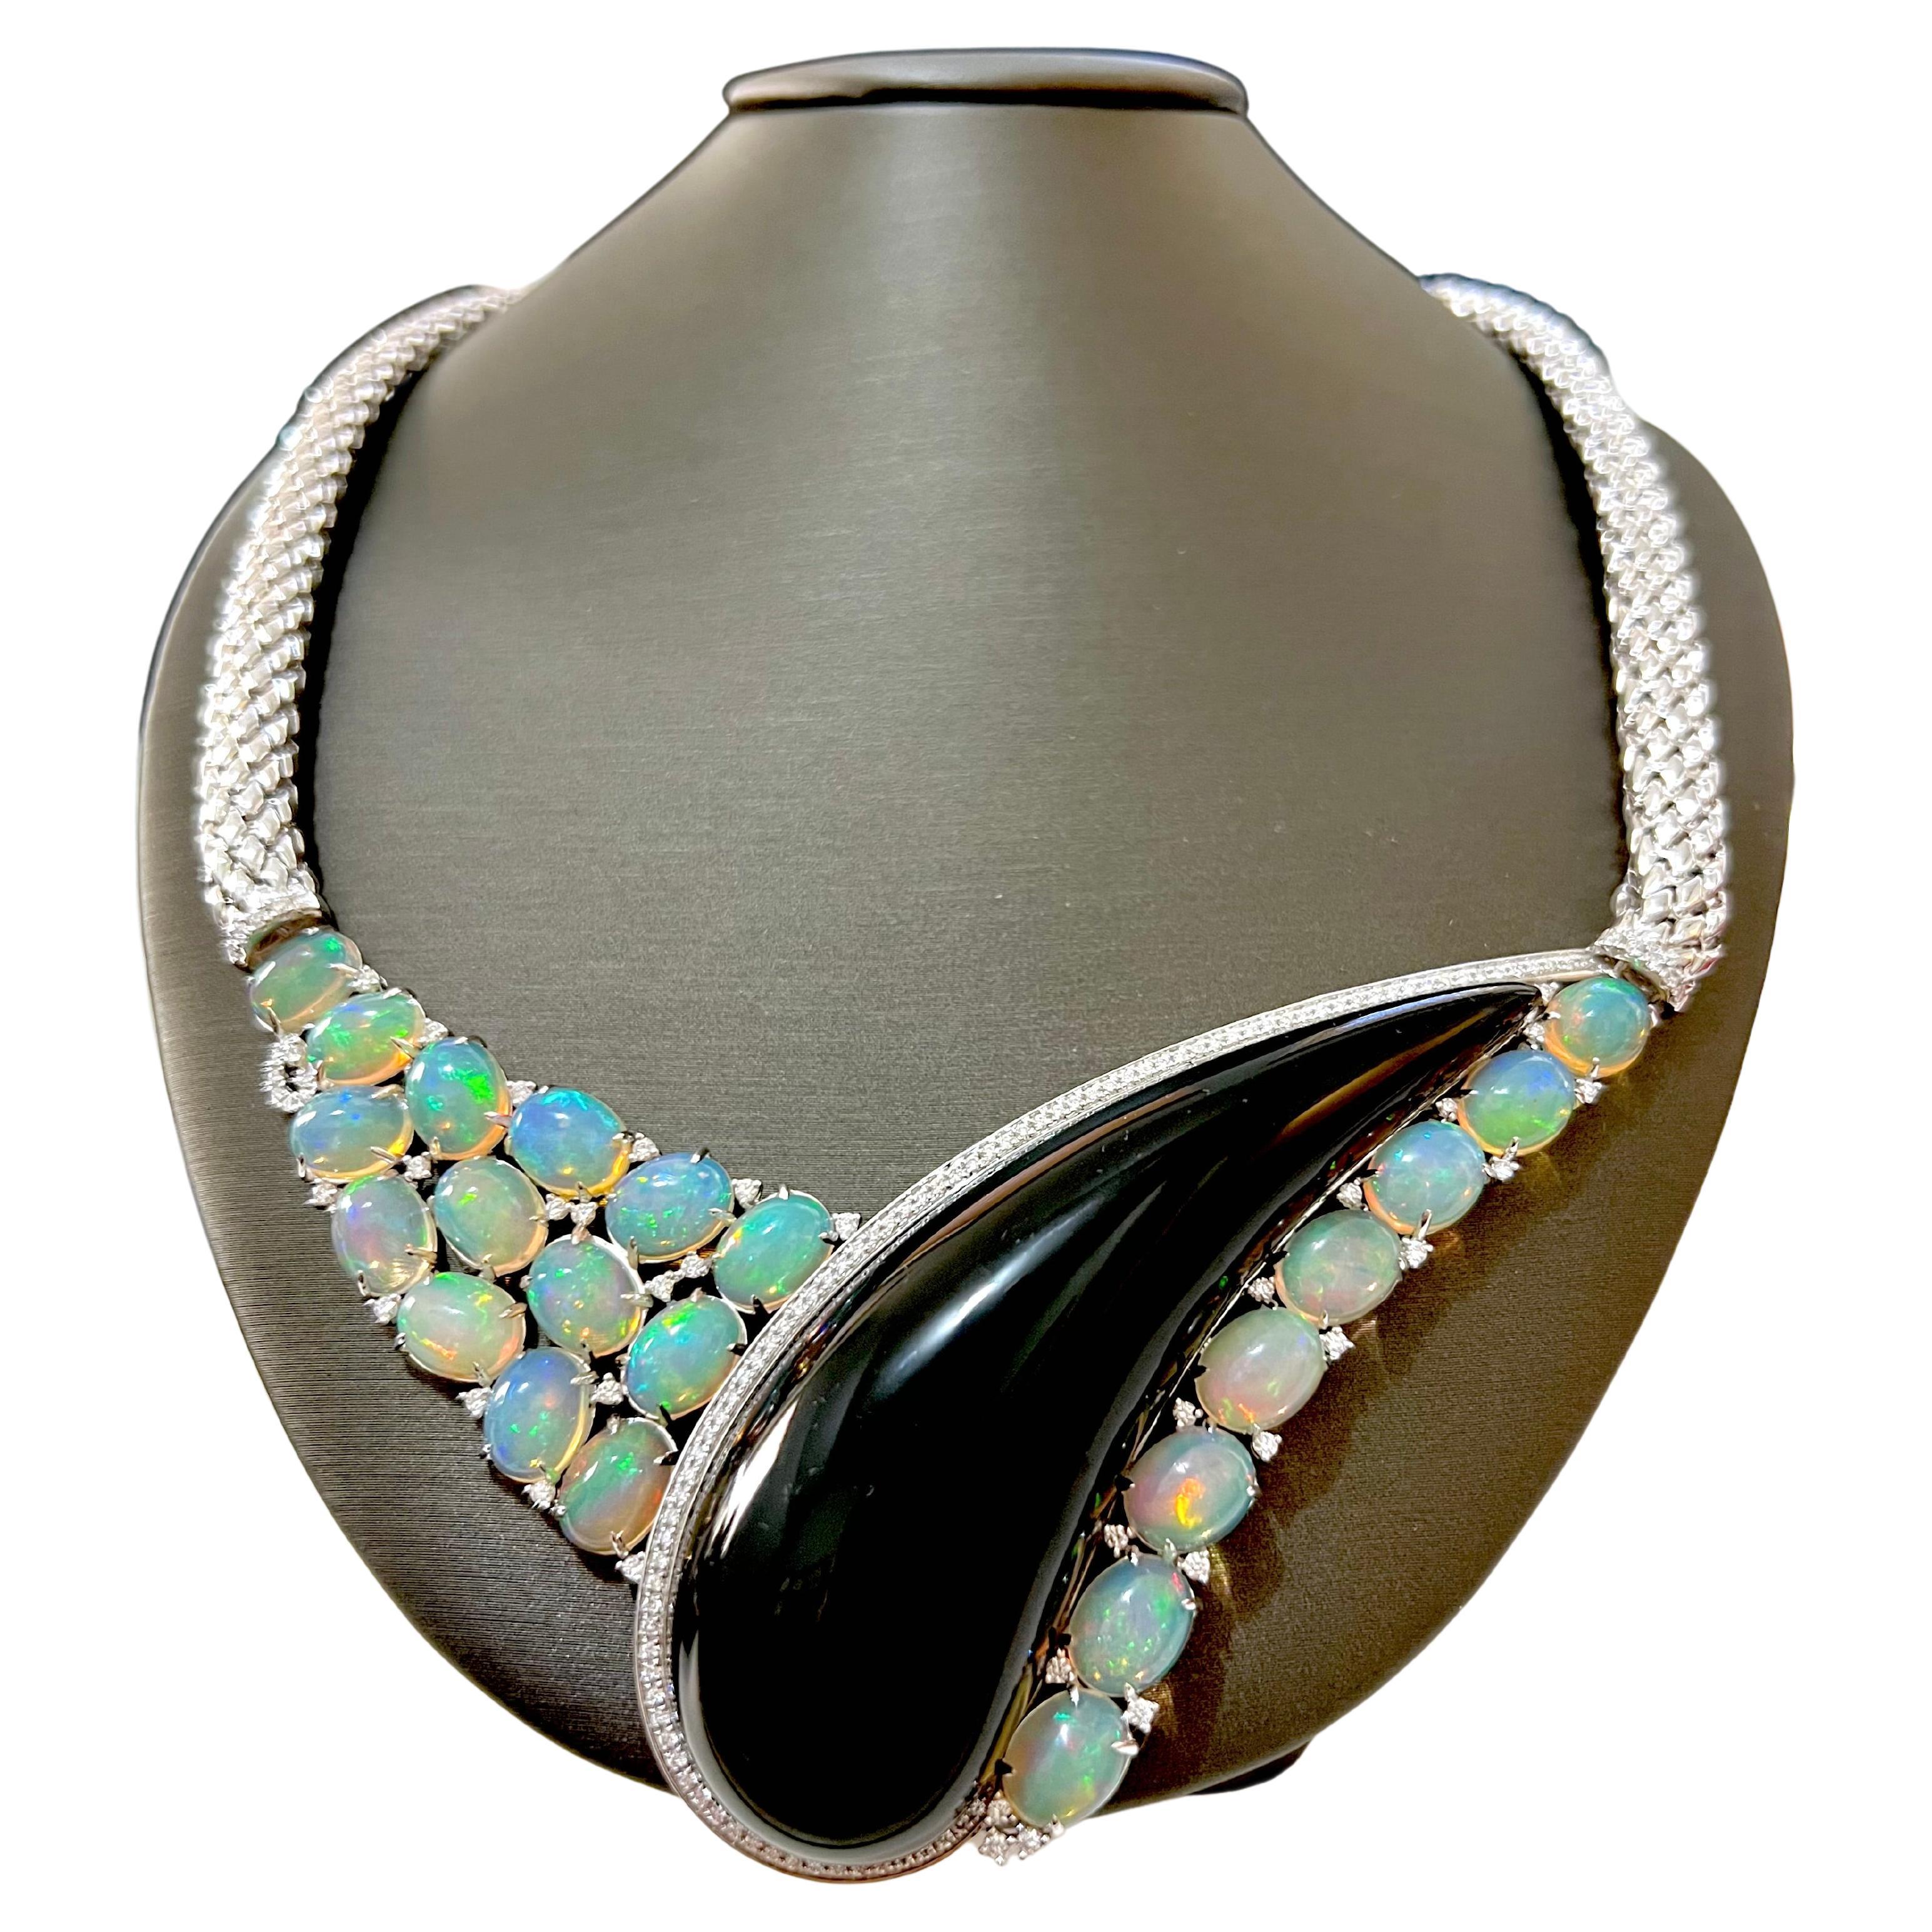 This Art-Deco style Ethiopian Opal necklace is handmade with custom cut onyx and diamonds.  The opals are strategically placed throughout the necklace to accentuate the elongated tear drop onyx.  The diamonds are sprinkled throughout and tastefully